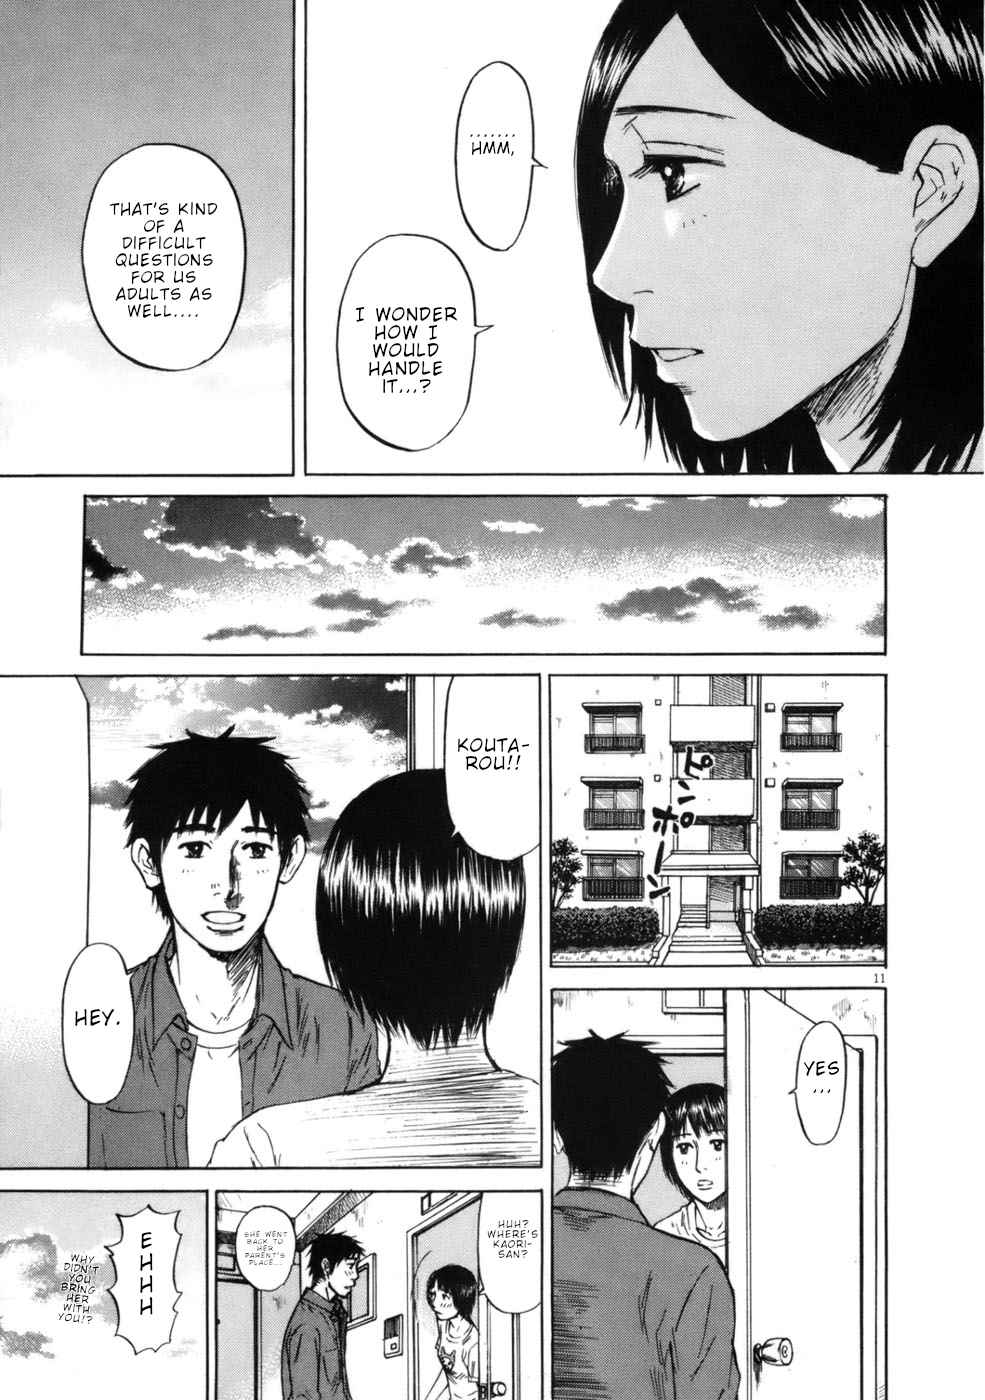 Hakuba no Oujisama Vol. 6 Ch. 63 The Situation of Their Family